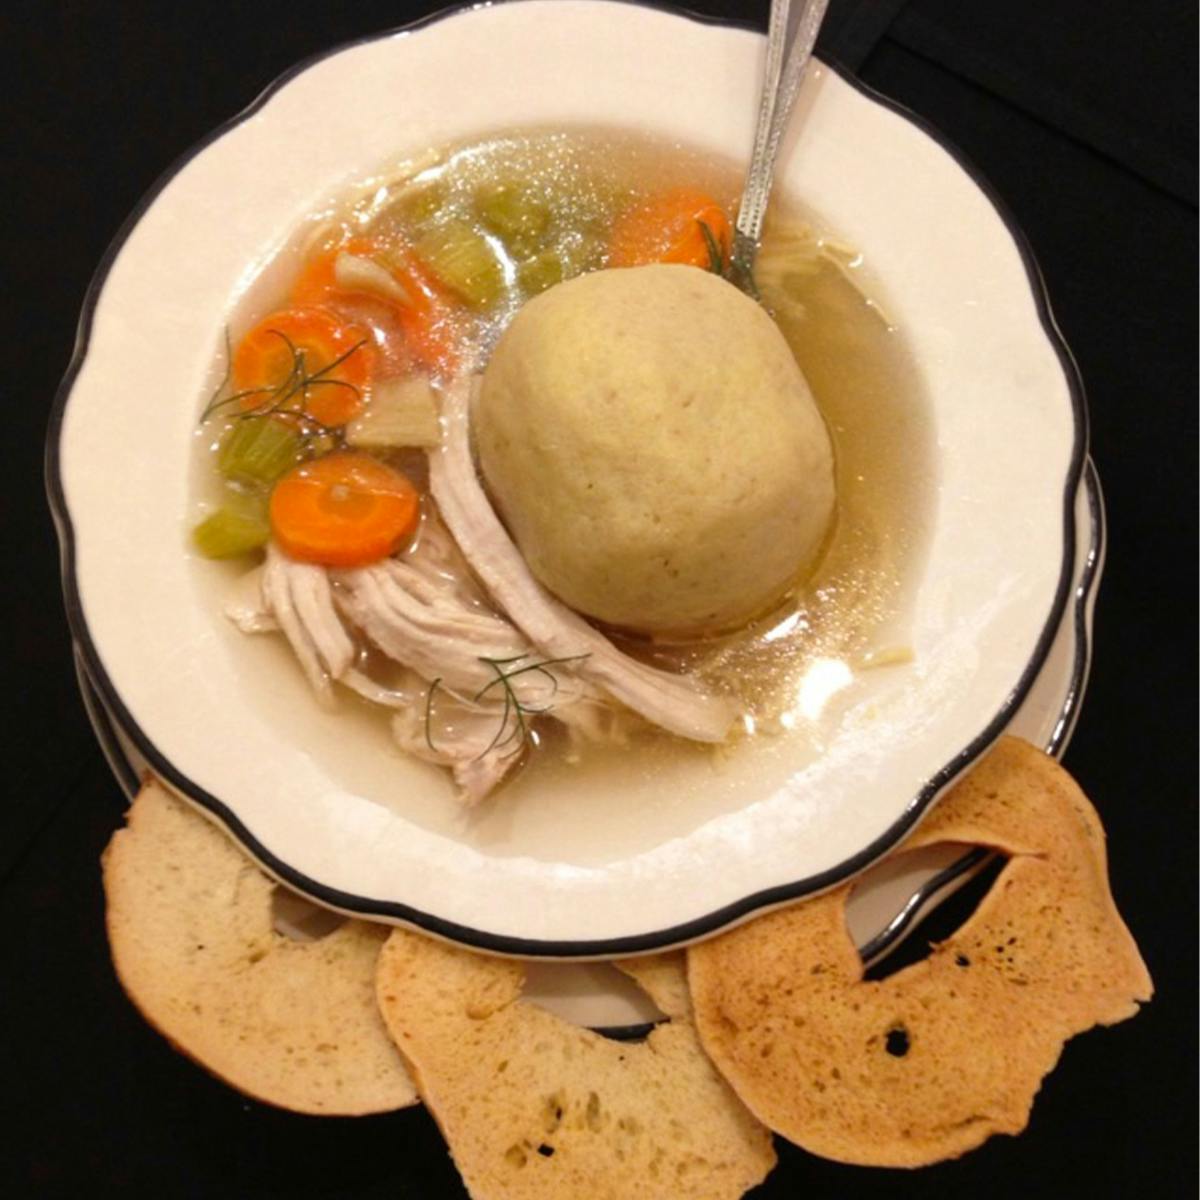 The Absolute Best Matzo Ball Soup in NYC